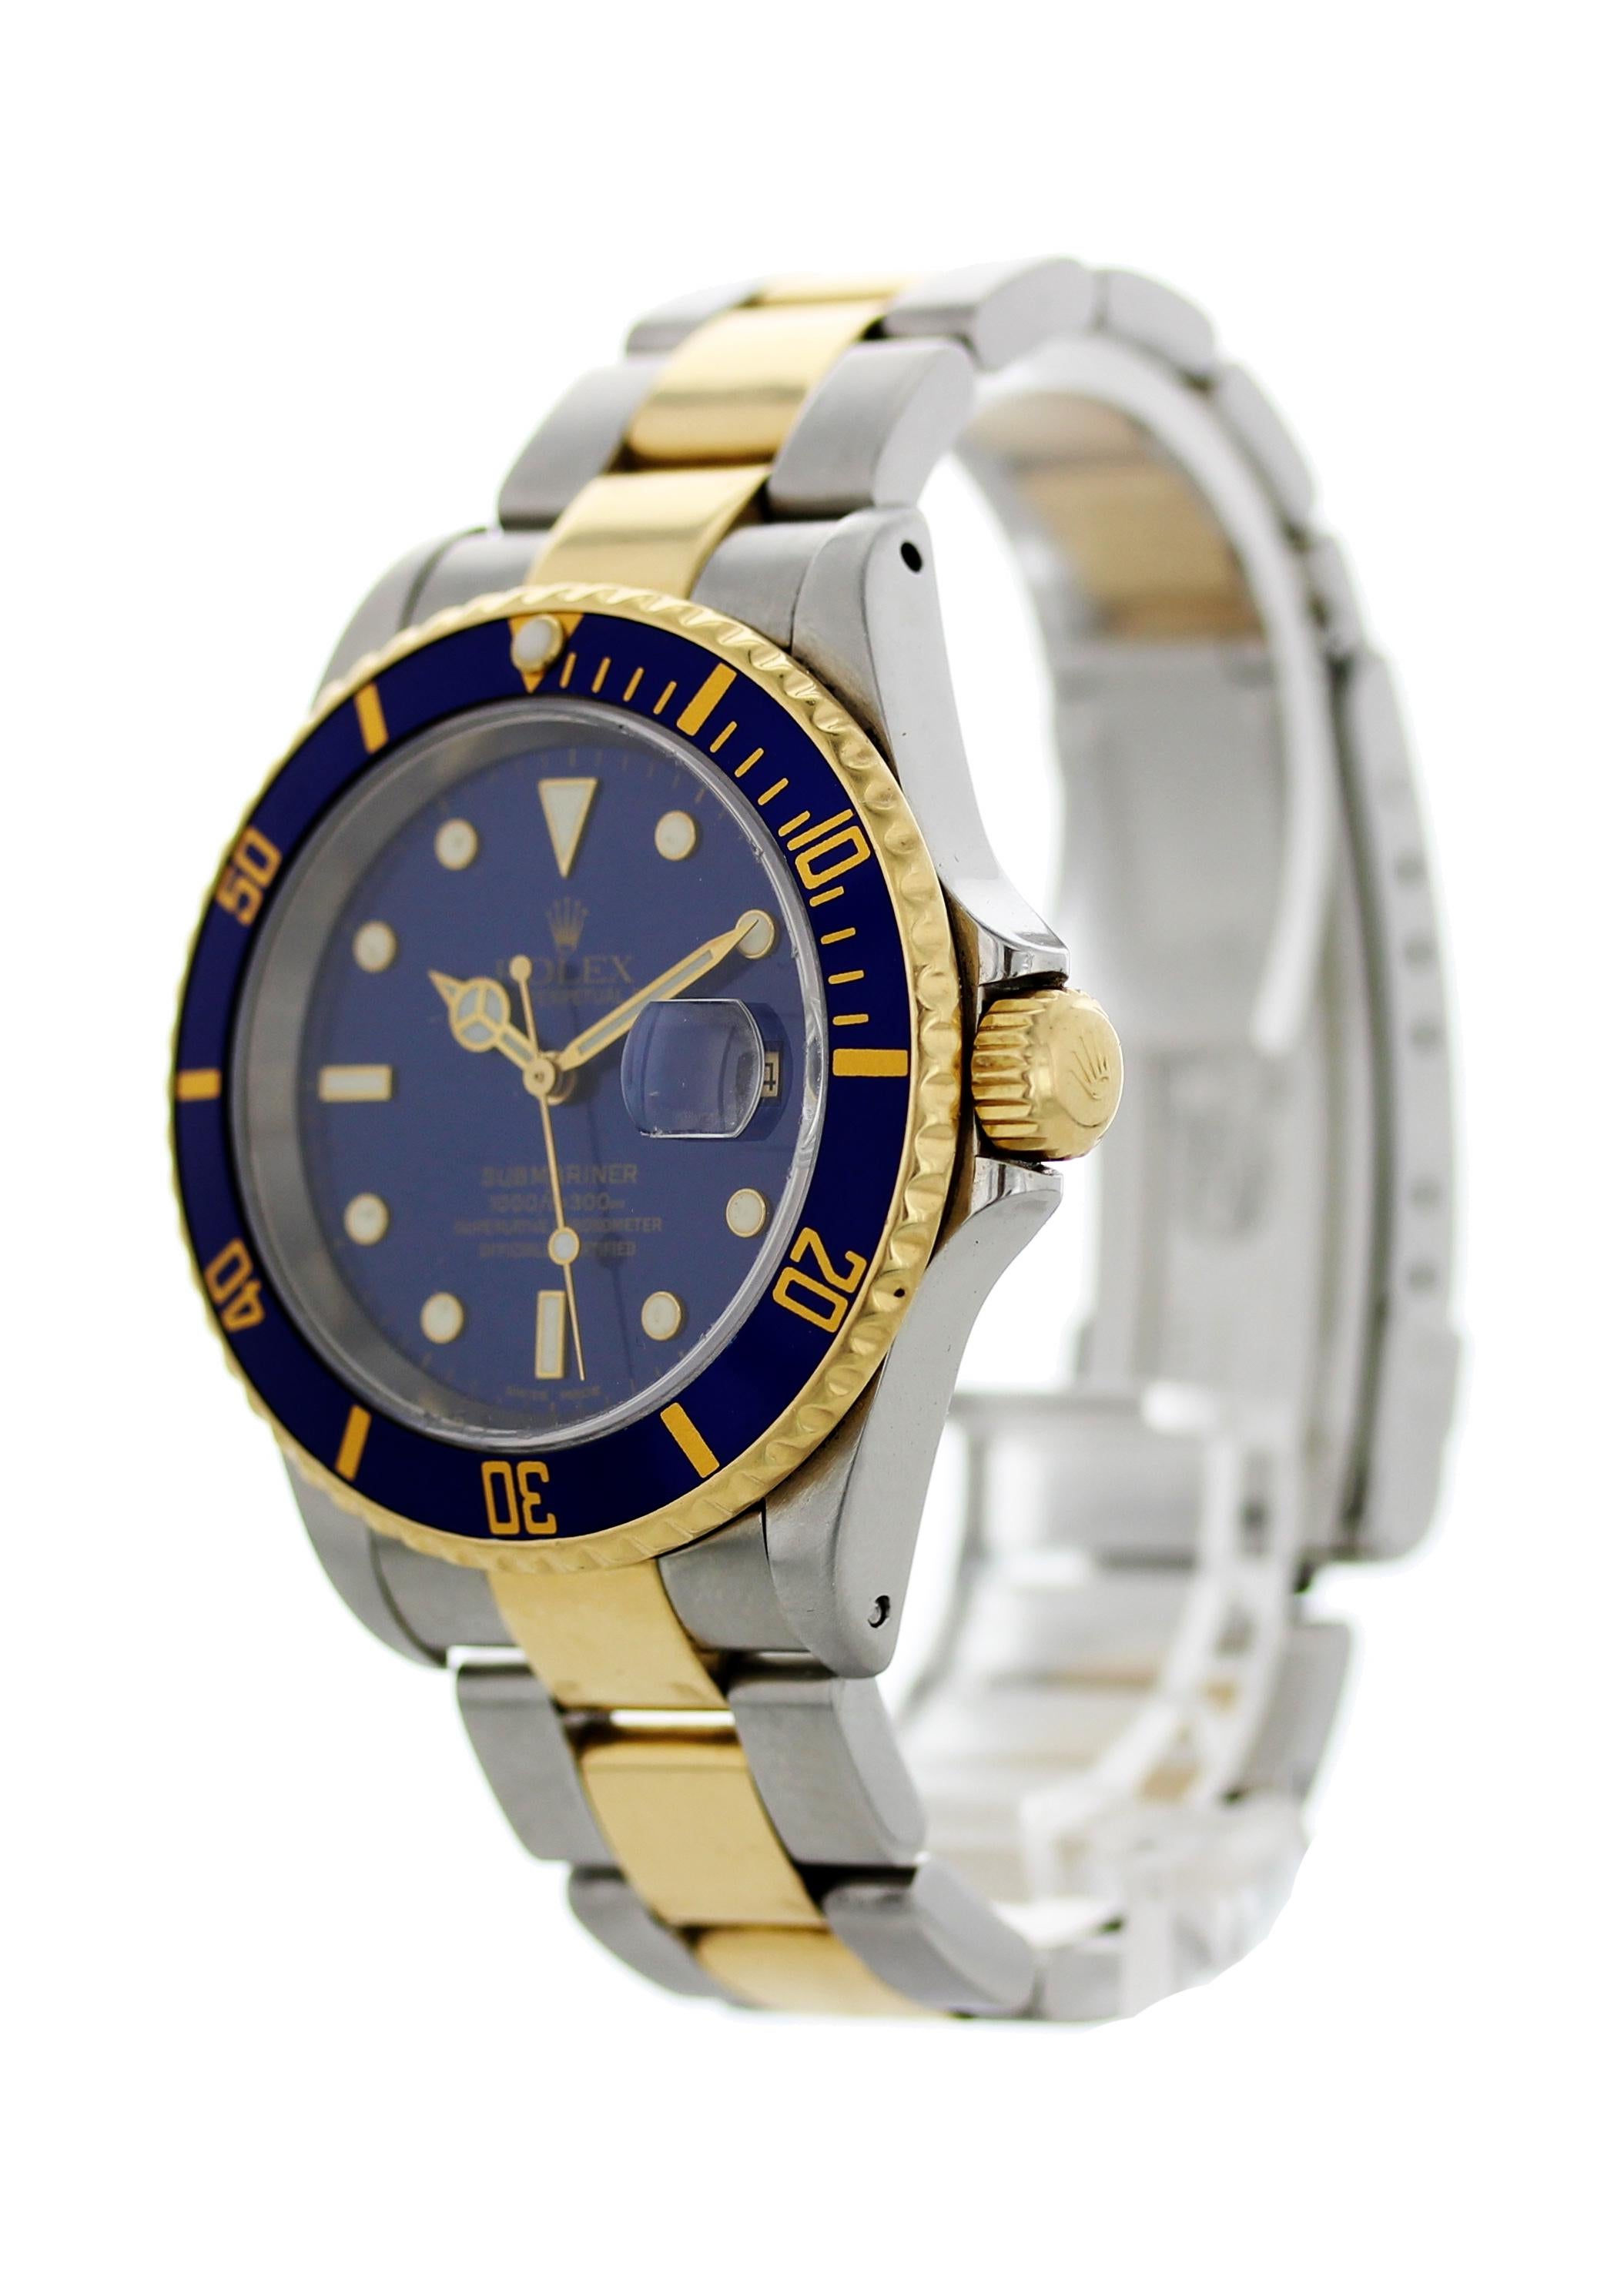 Rolex Oyster Perpetual Submariner Date 18 Karat 16613 Men’s Watch In Excellent Condition For Sale In New York, NY